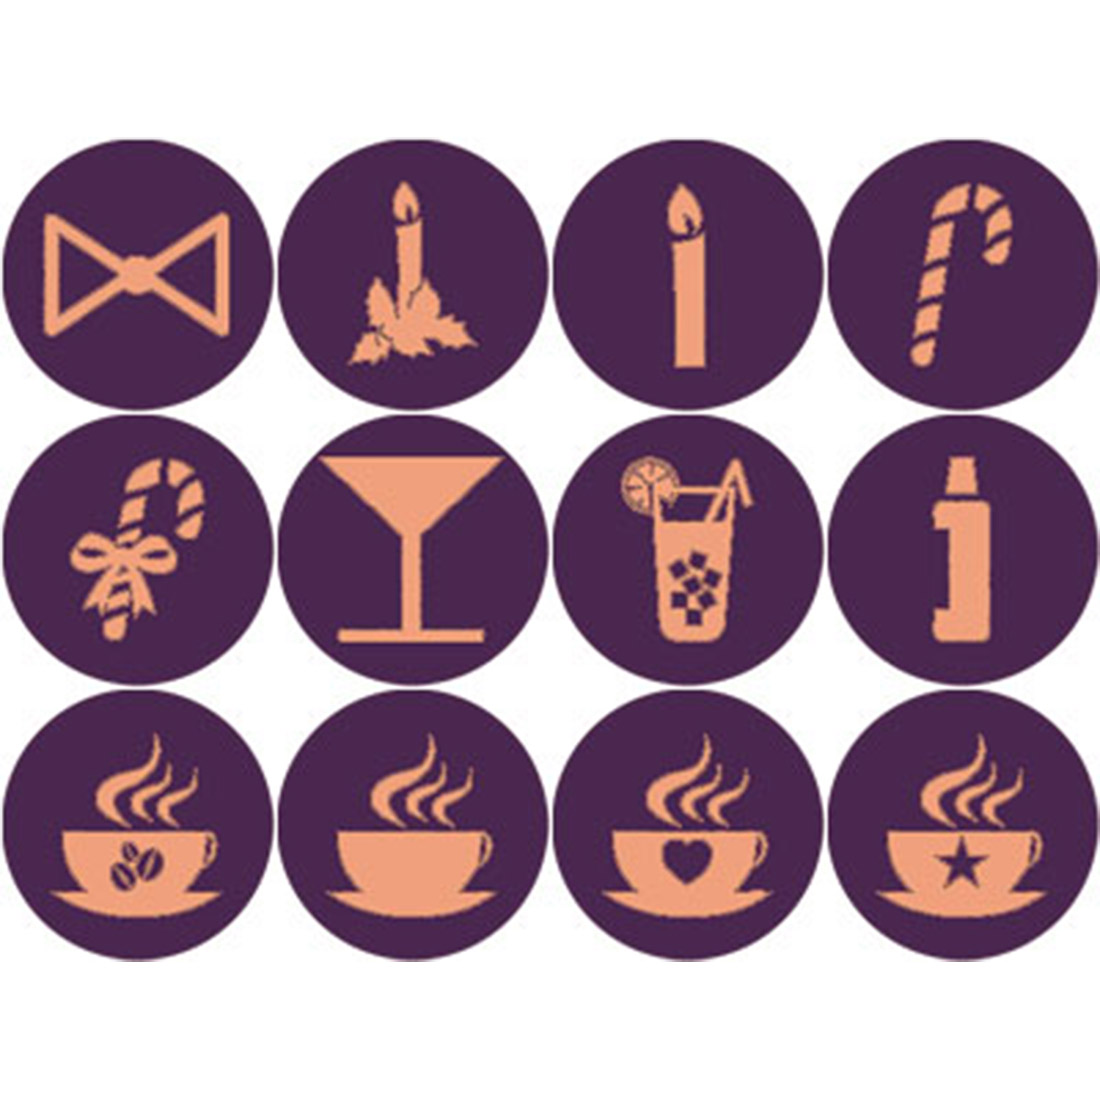 ORANGE AND PURPLE DRINK ROUND ICONS cover image.